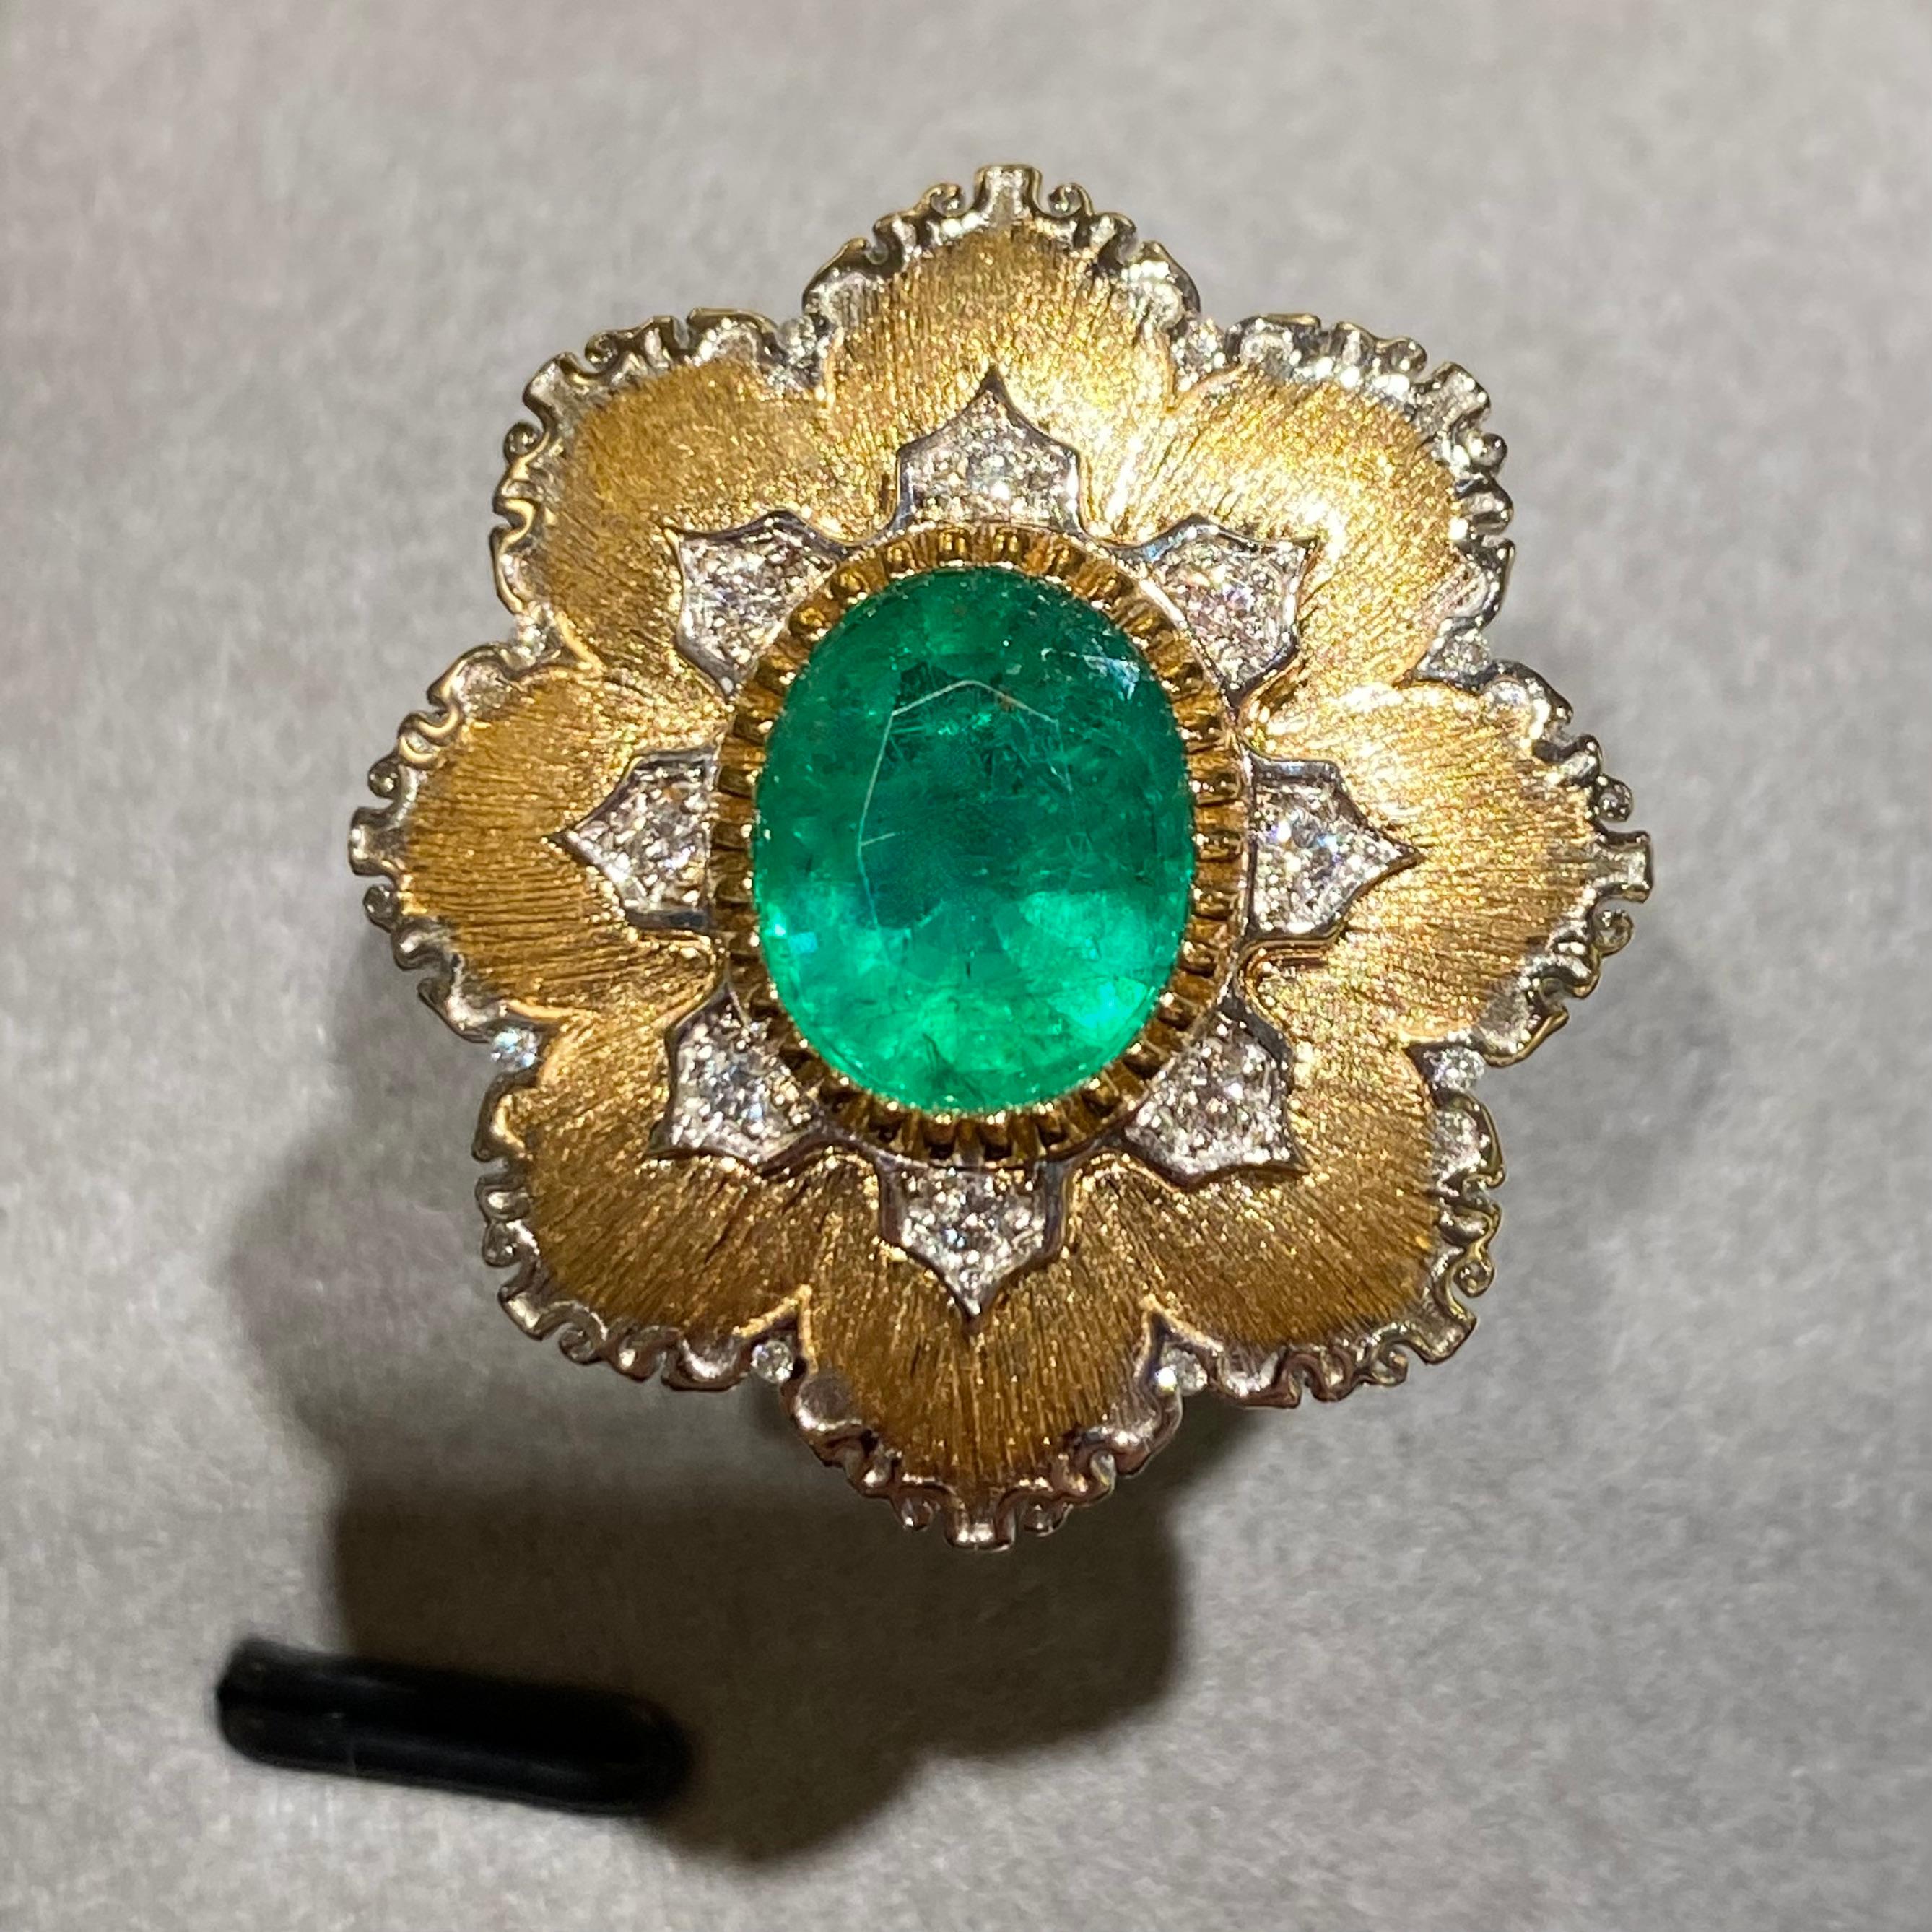 This is flower motif modified cluster cocktail ring. The Emerald is first surrounded by Diamond pave then the textured yellow gold flower petals. This technique is well know in the Jewellery industry but haven't been seen very often in actual